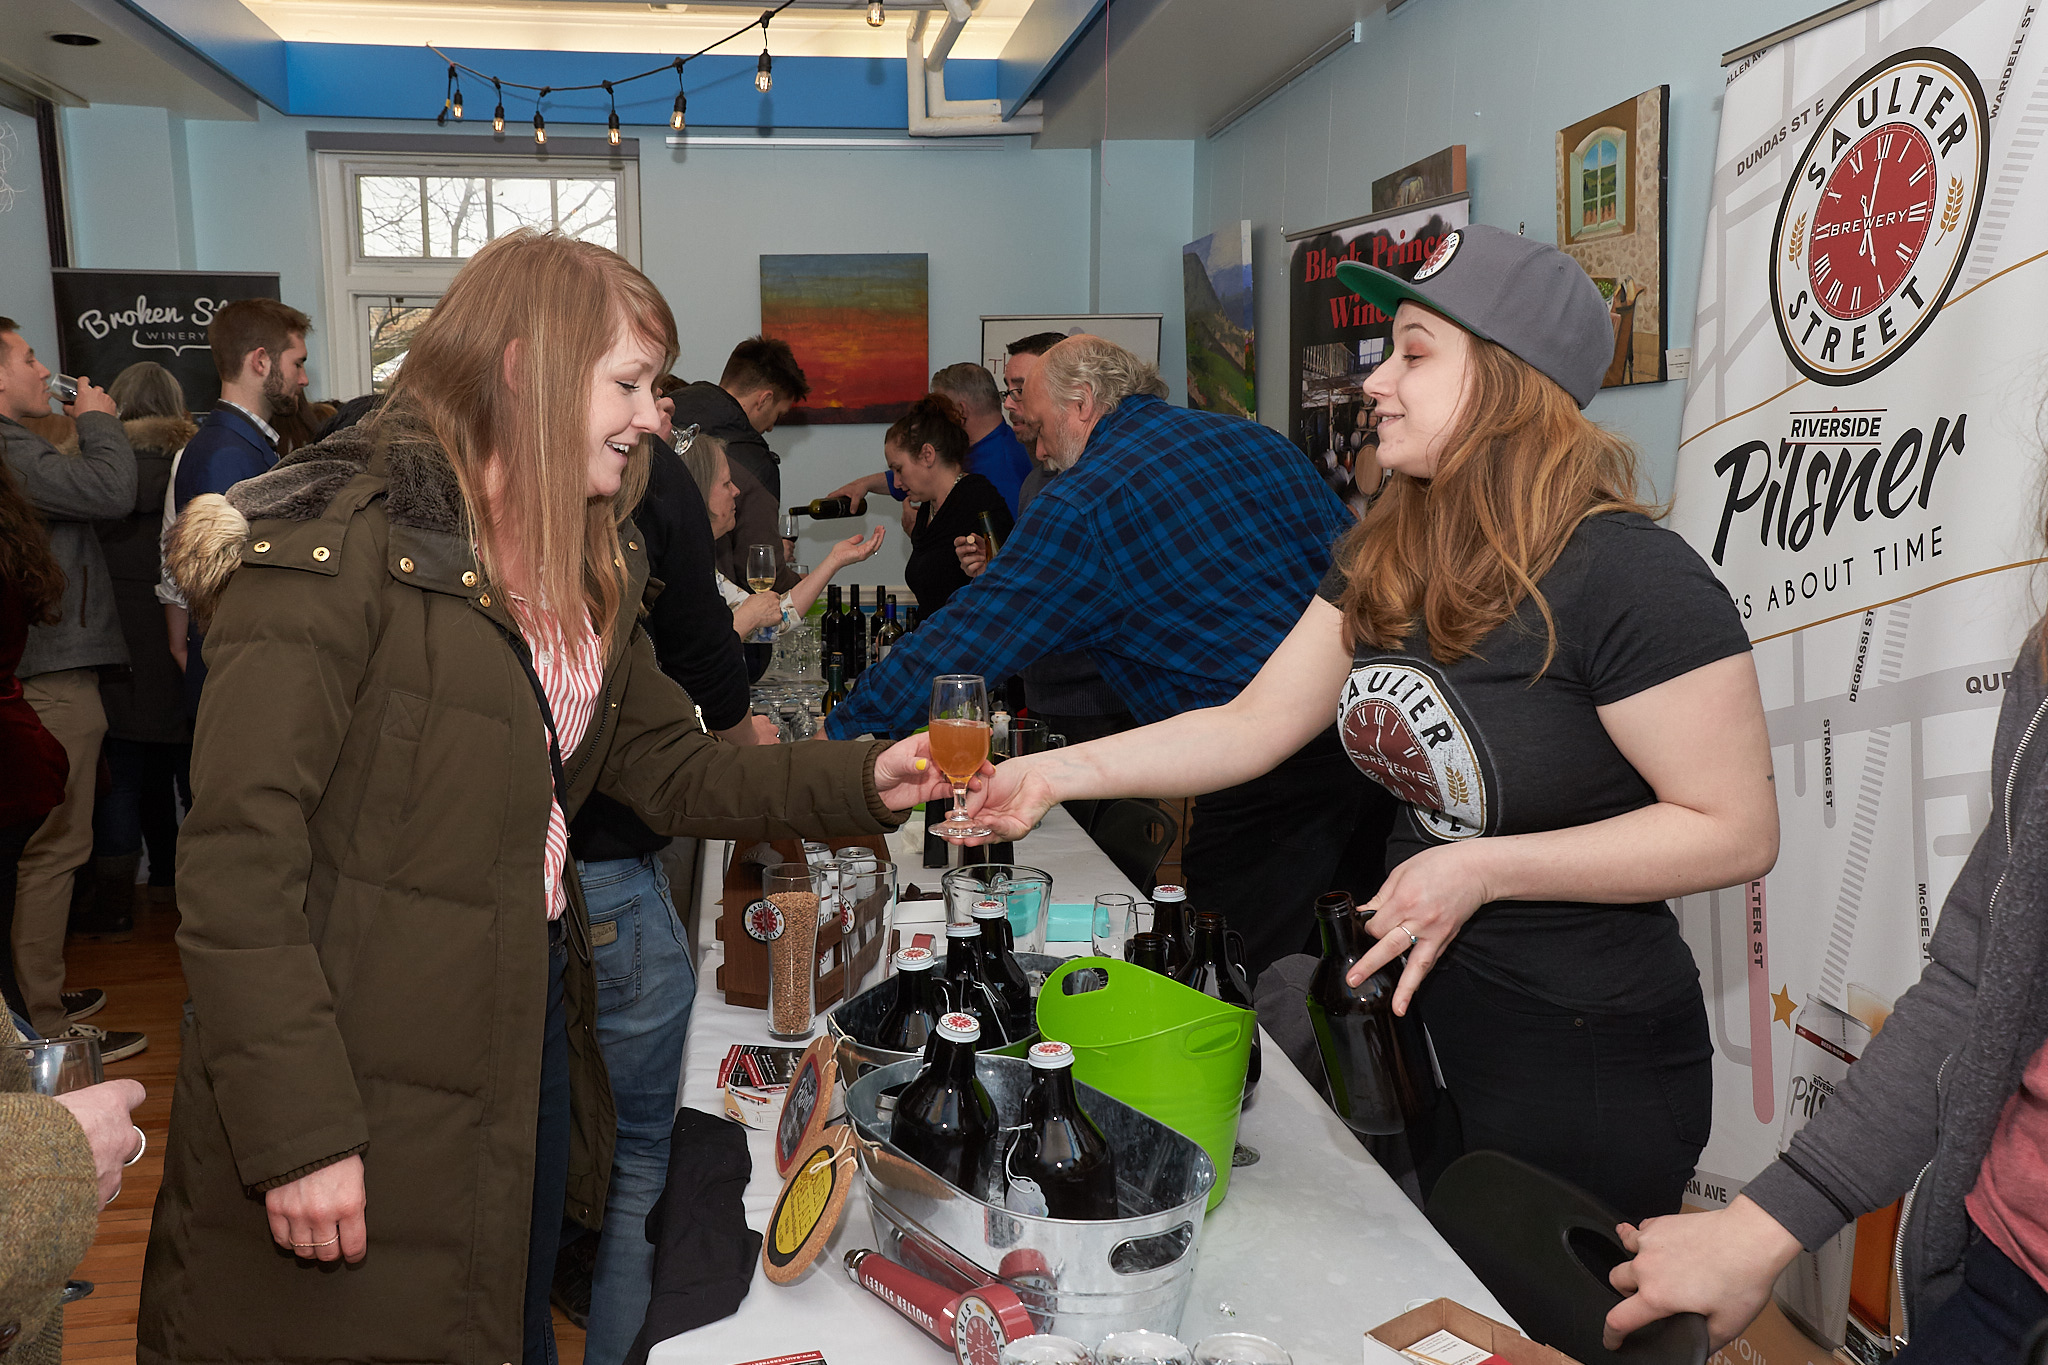 Apr 7th Riverside Wine & Craft Beer Expo 2018 -Saulter St Brewery (photo: PAWELECPhoto)